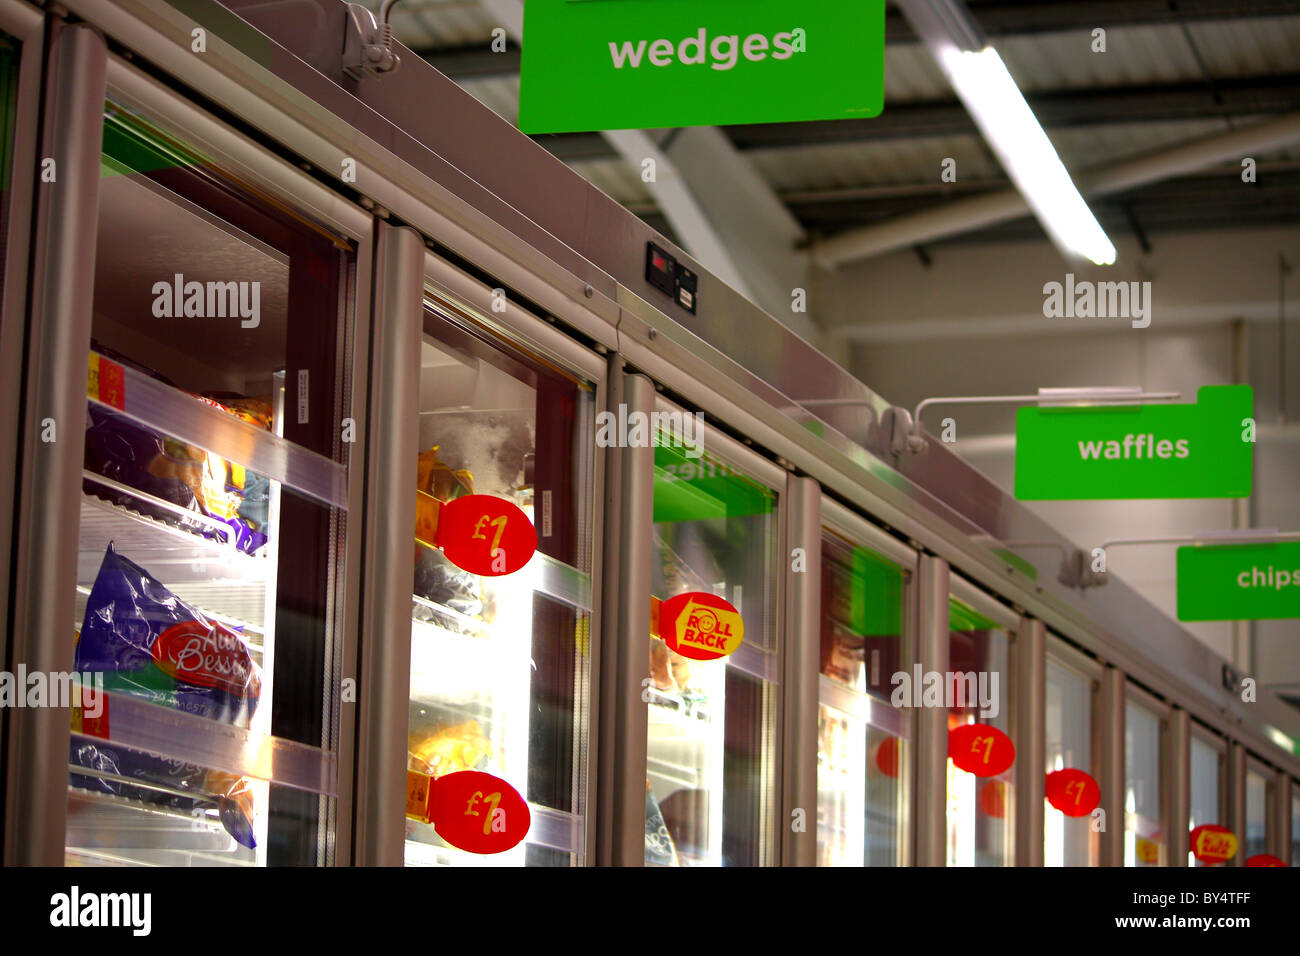 Food bargains at Asda's supermarket; showing freezer food products at competitive prices after the VAT rise in 2011 Stock Photo